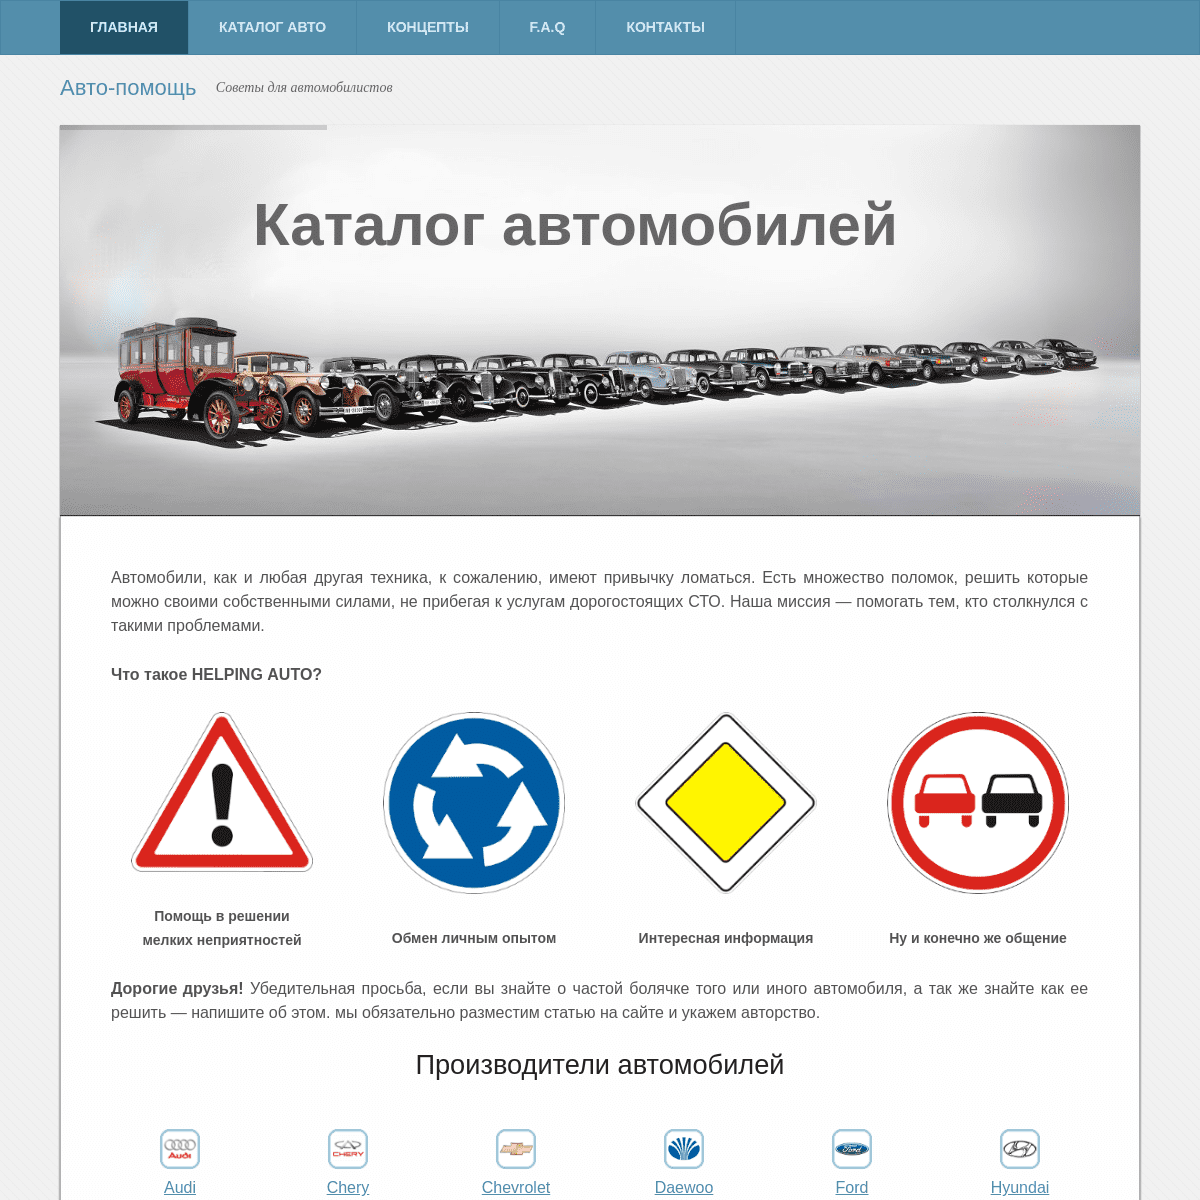 A complete backup of helping-auto.ru